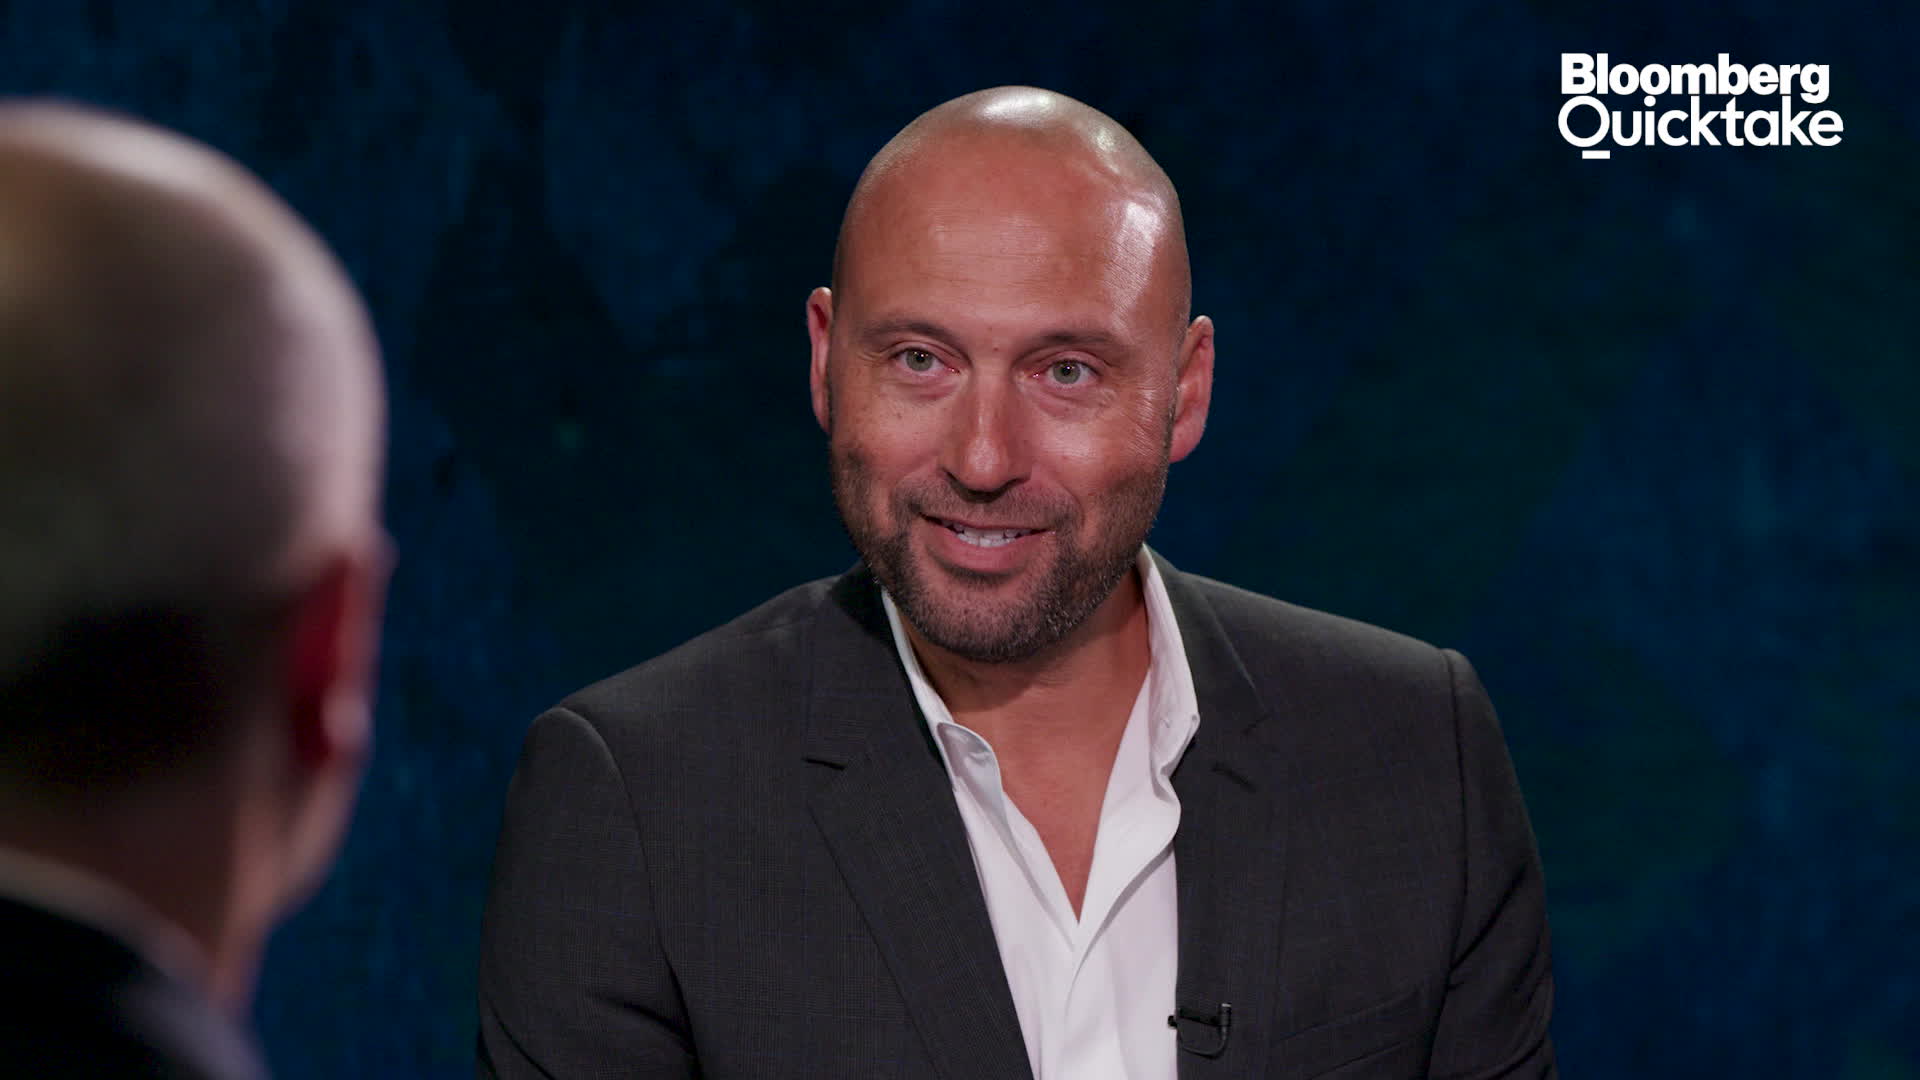 Derek Jeter Joins Athletes Looking to Cash in with NFTs